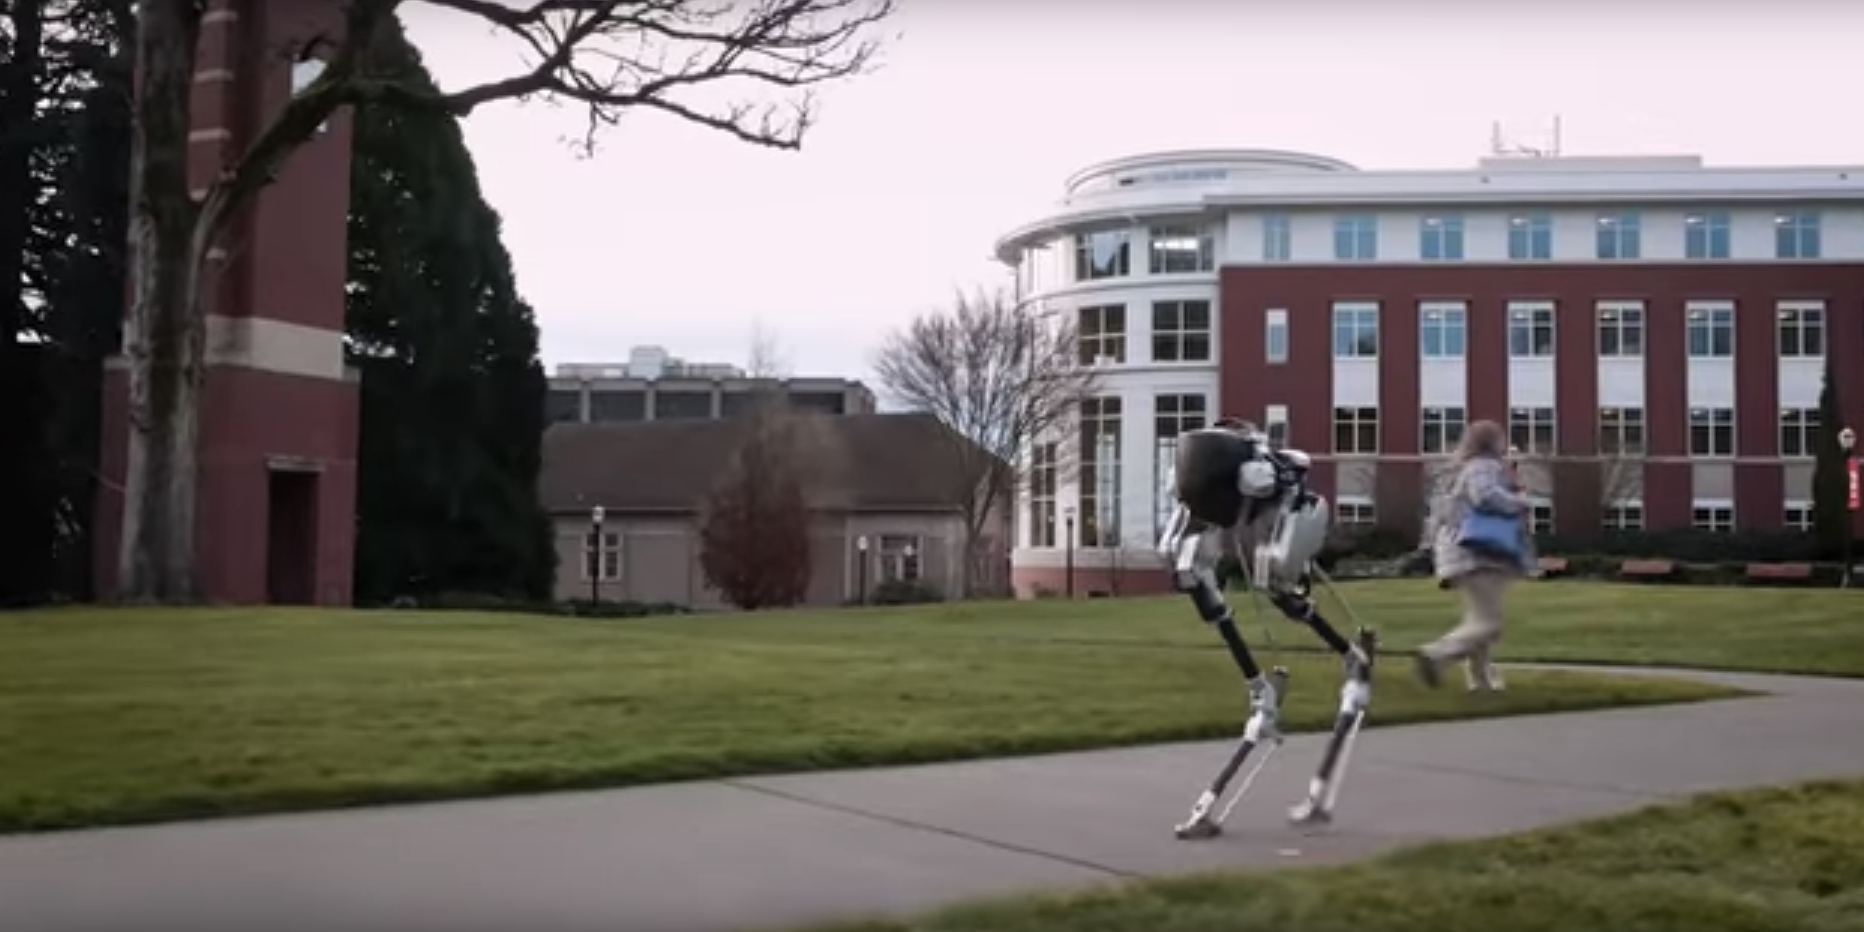 Meet Cassie, the Bipedal Robot Here to Ostrich-Walk Into Your Nightmares